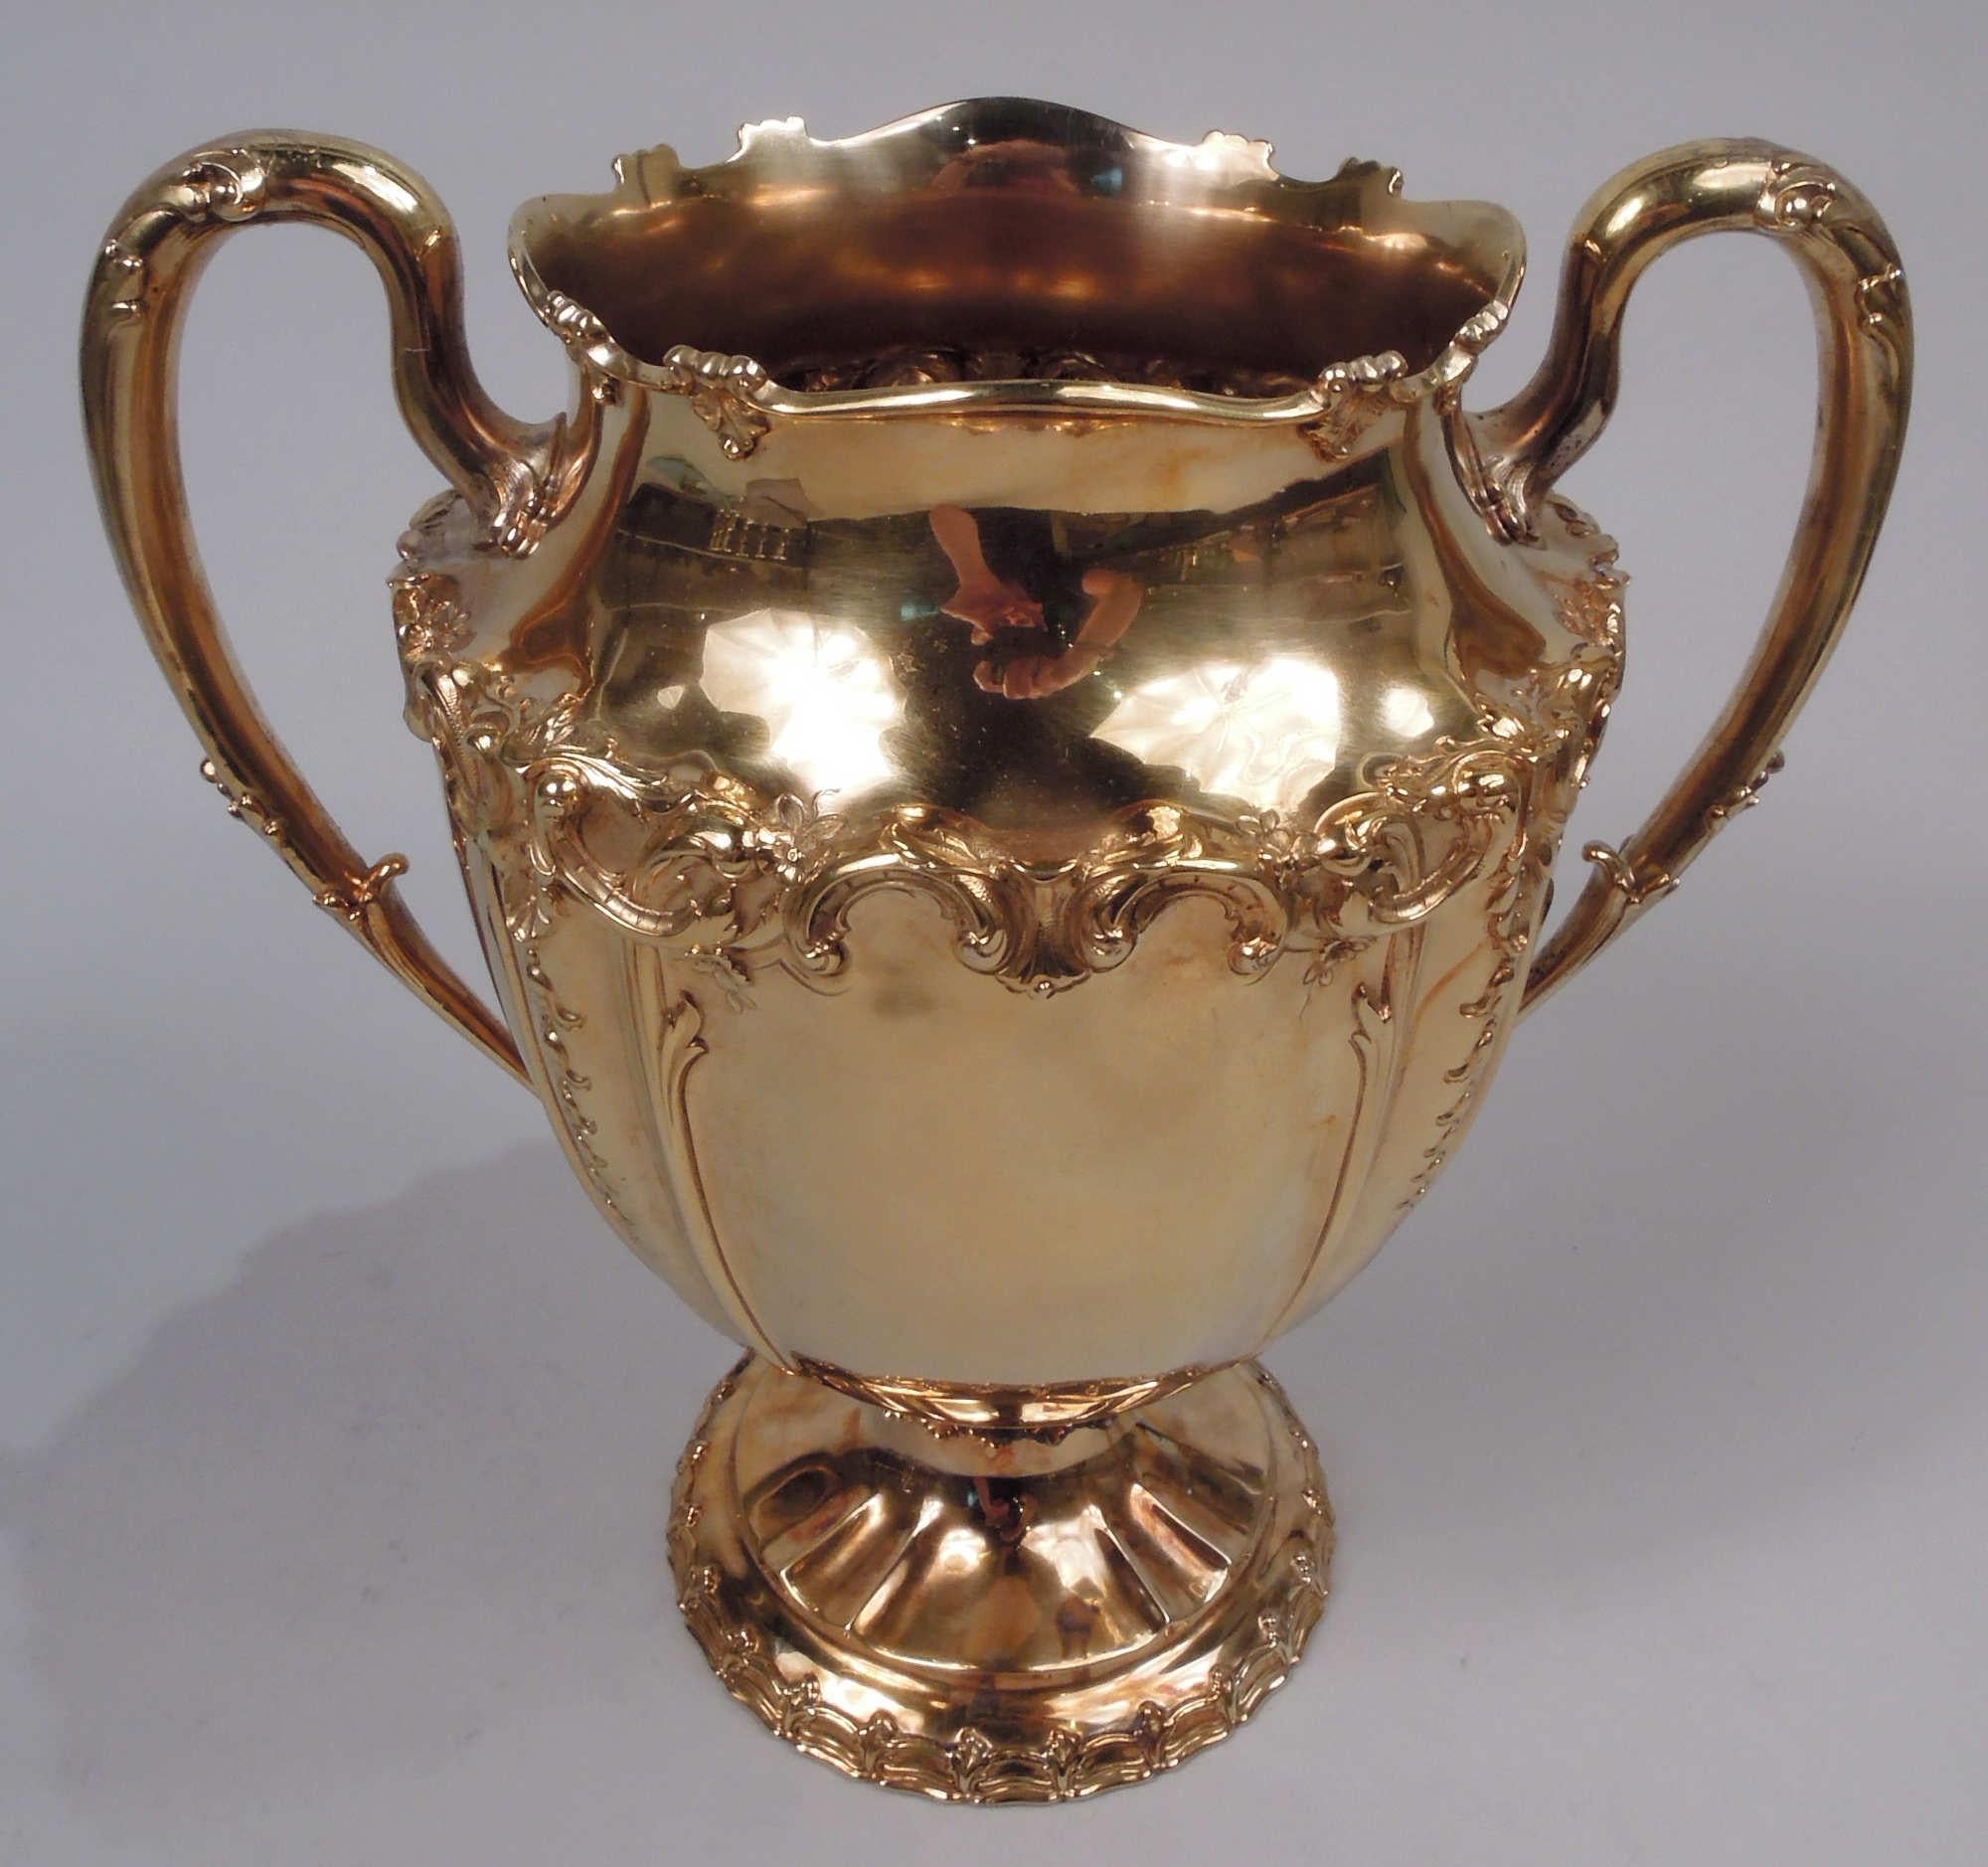 Edwardian Classical sterling silver urn. Made by Tiffany & Co. in New York. Curved and tapering bowl with leaf flange on domed foot; leaf-capped, wrapped, and mounted high-looping side handles. Chased leafing-scroll border with pendant flowers.